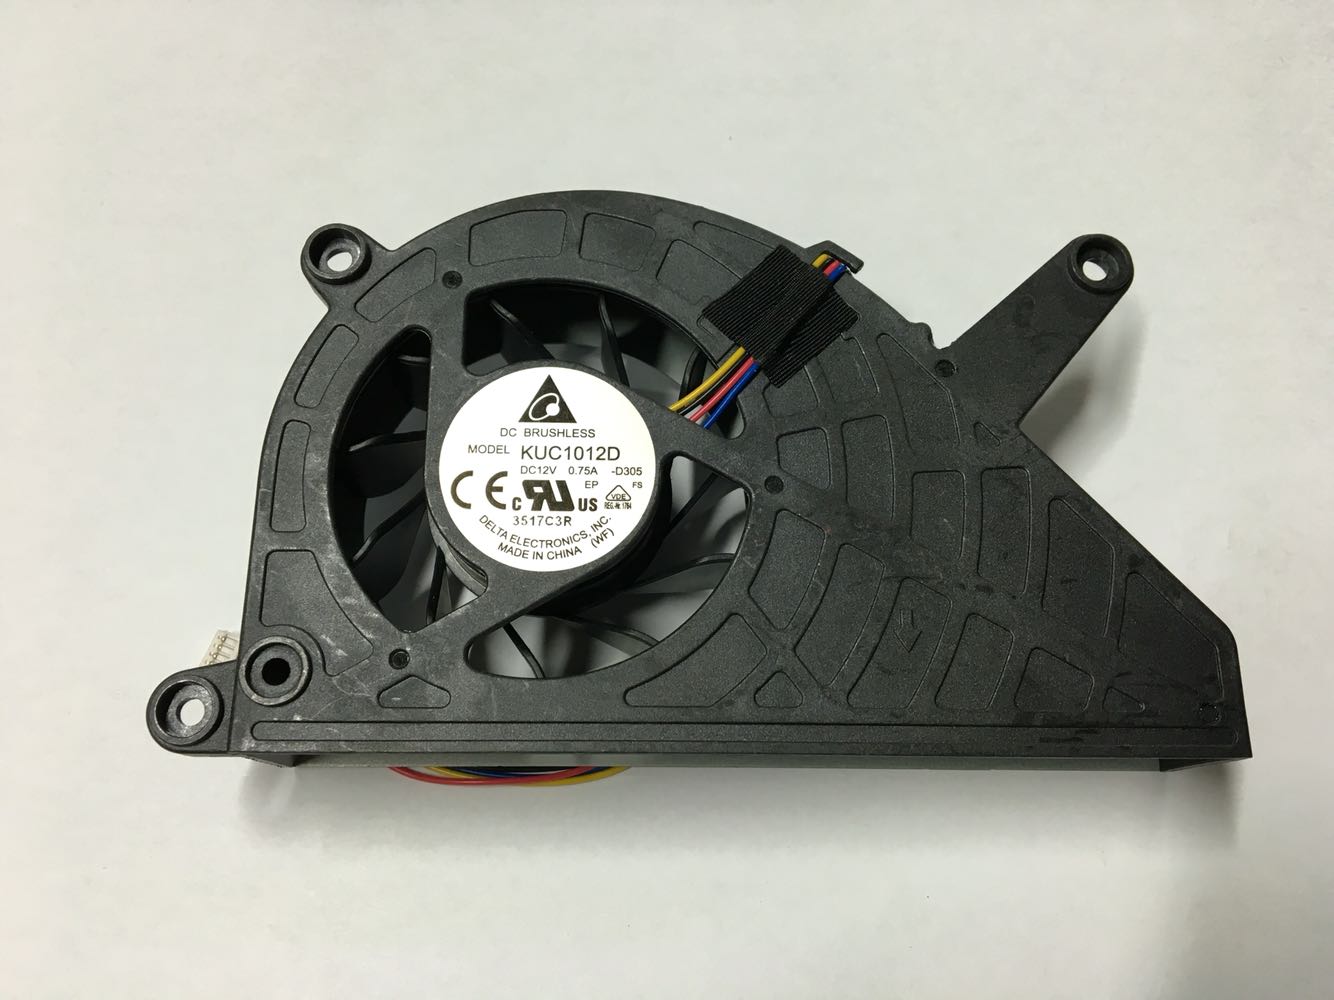 ASUS ET2201 ET2311 ET2220I ET2410INTS ET2410IUTS ET2411 KUC1012D E211 D305 4Pin 4Wire All In One PC Cooling Fan